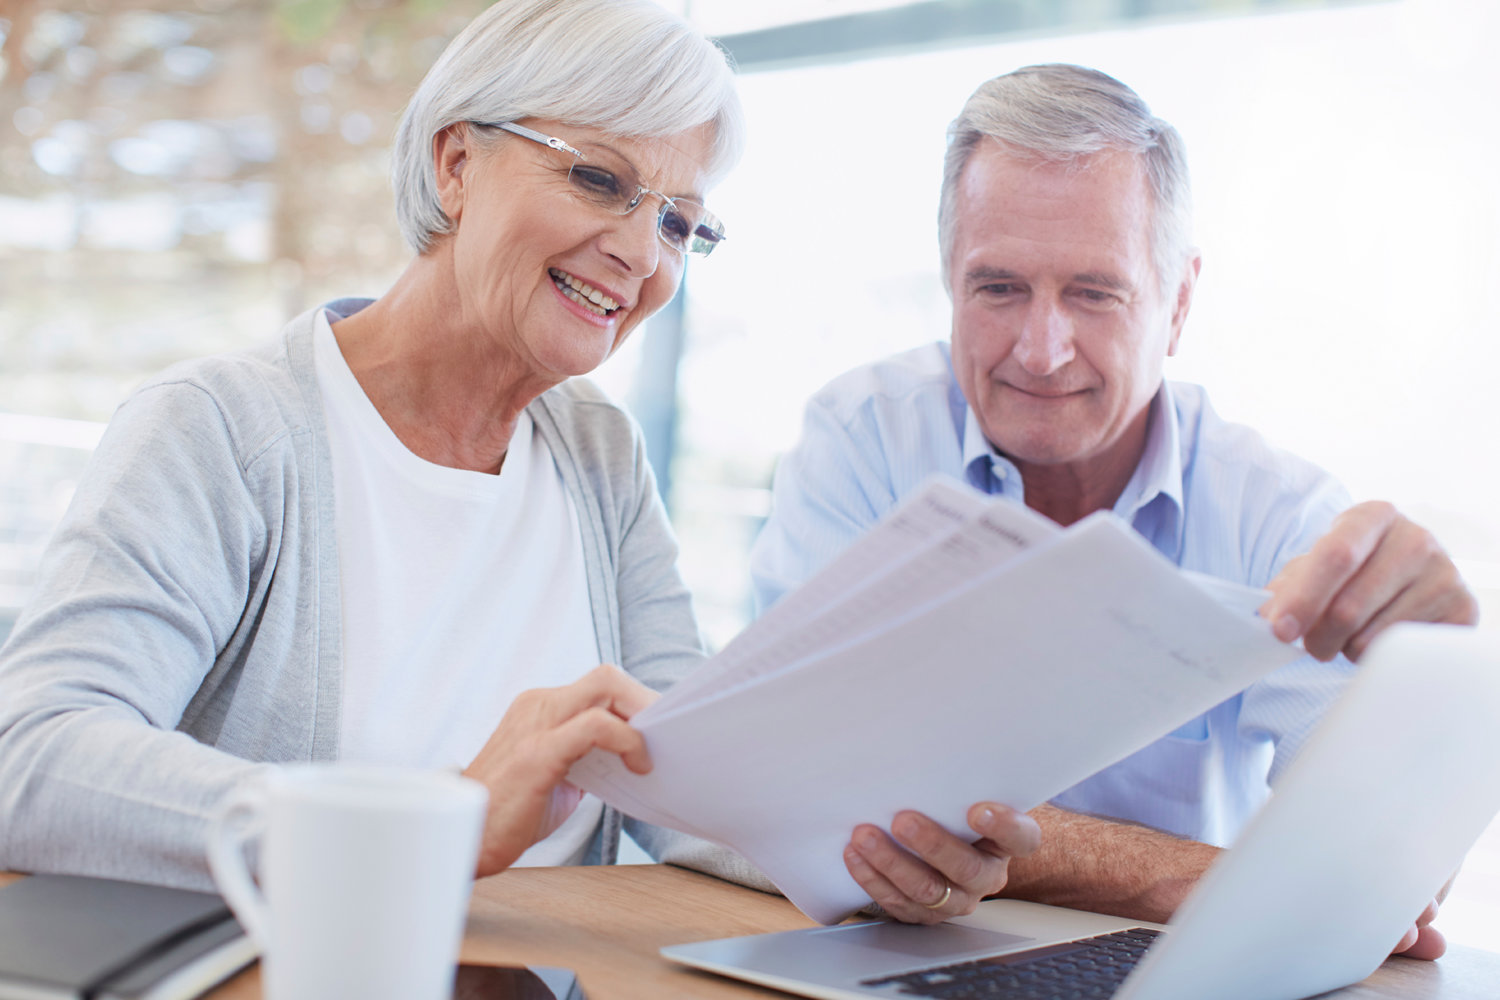 Senior rate credit can save a senior up to $500 per year on heating and other electrical expenses.